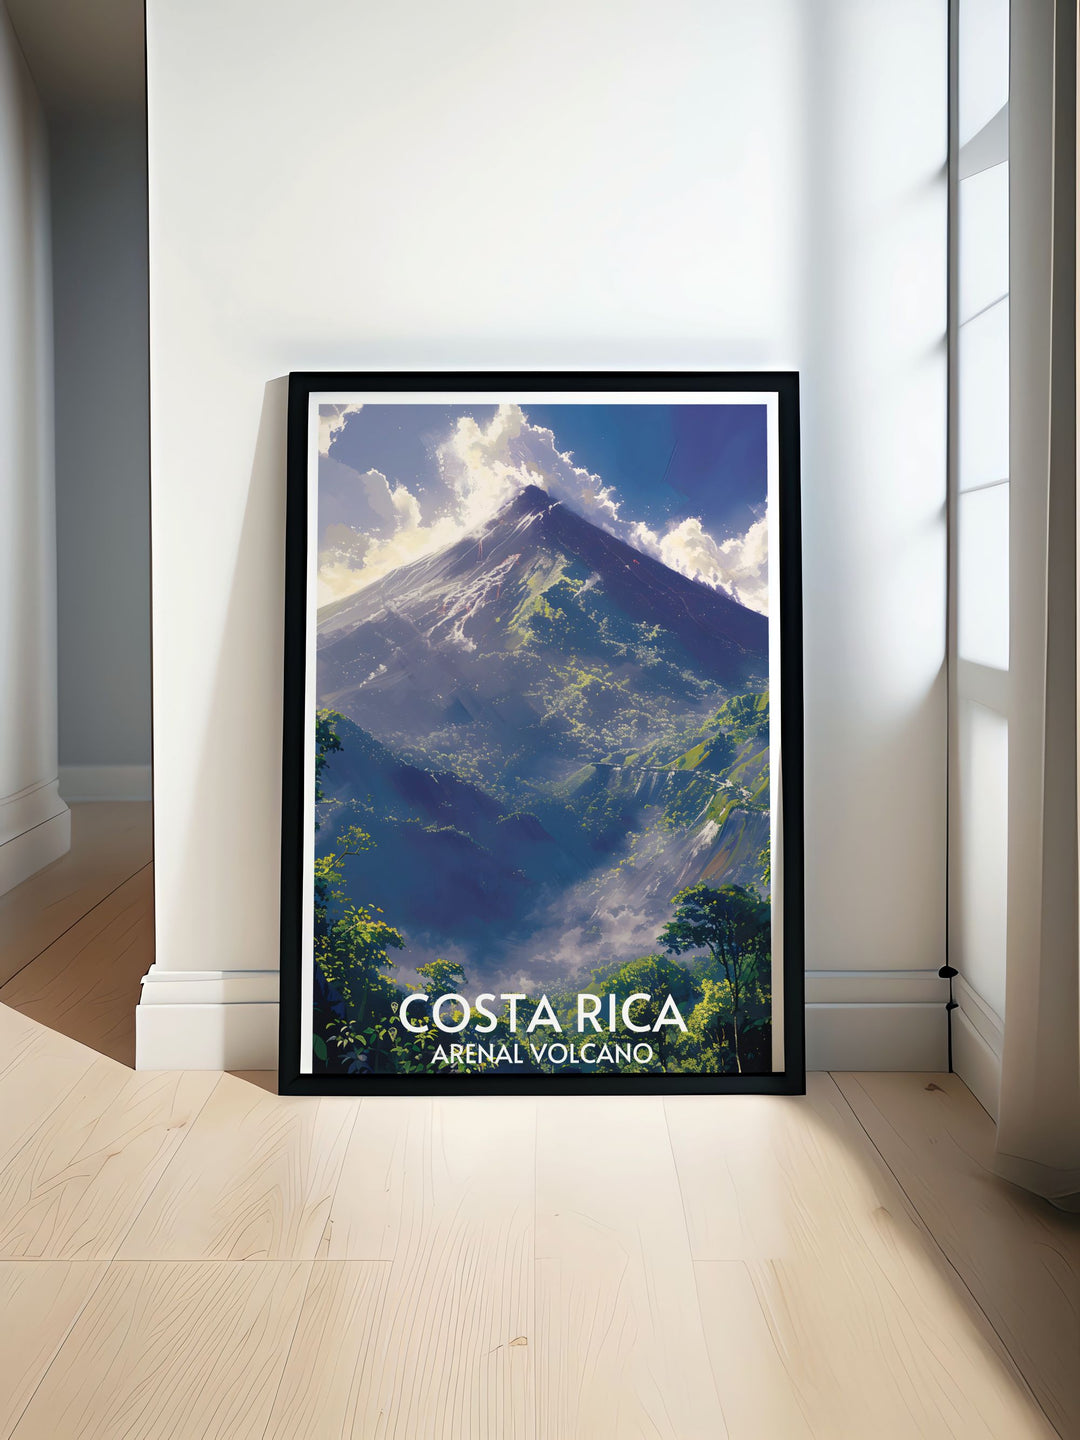 Arenal Volcanos lush surroundings captured in the rainy season, highlighting the vibrant biodiversity in this wall art.